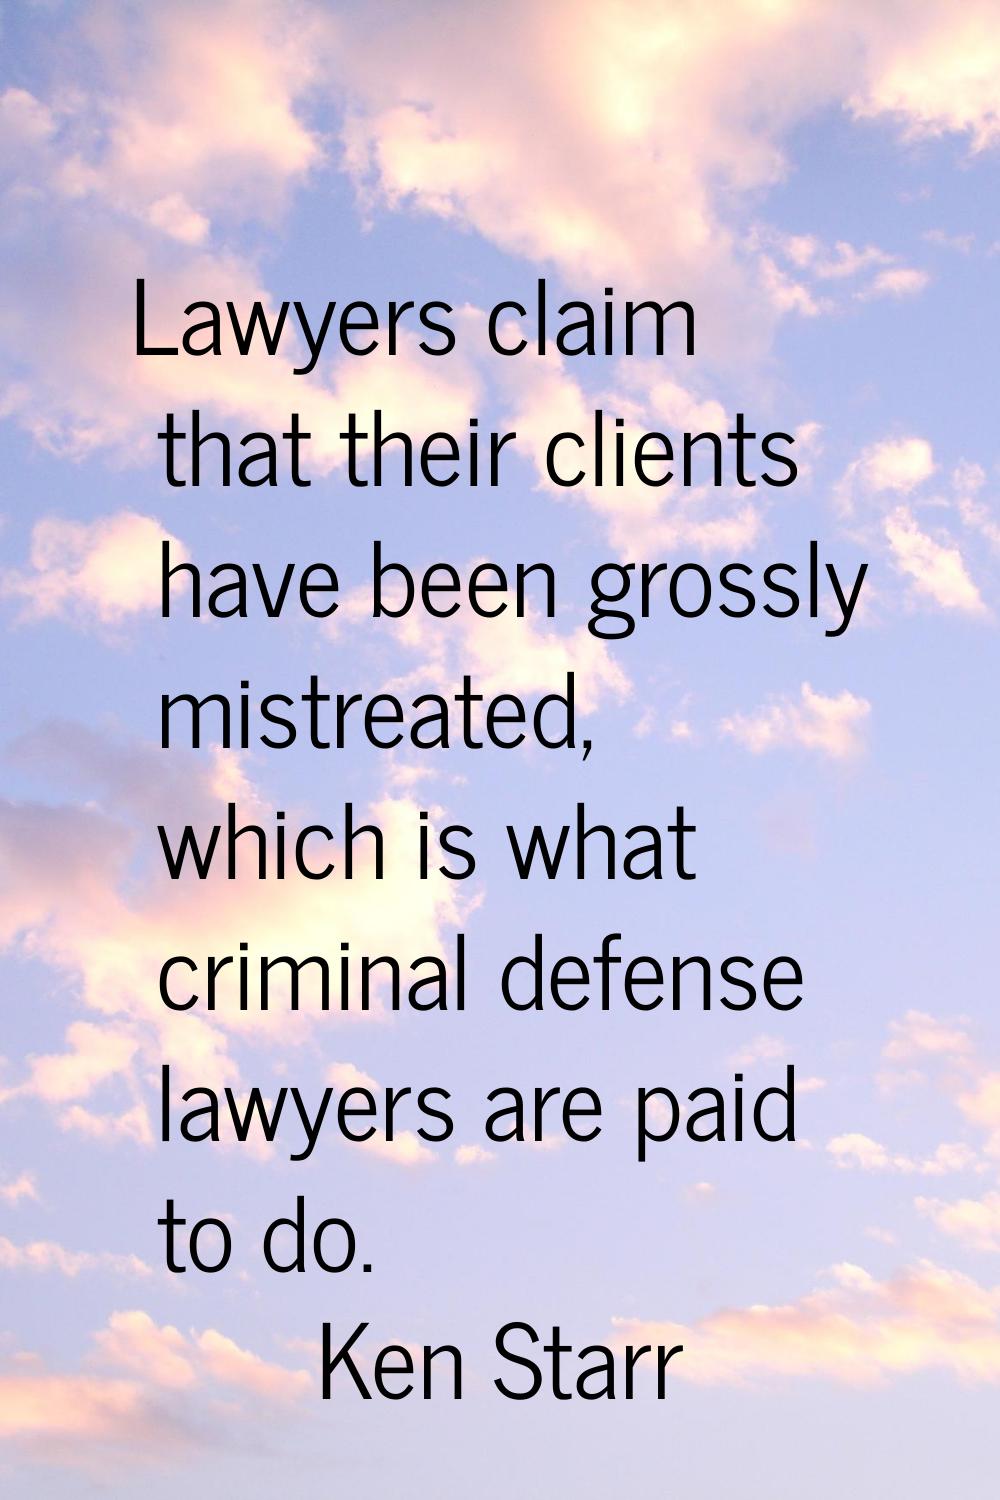 Lawyers claim that their clients have been grossly mistreated, which is what criminal defense lawye